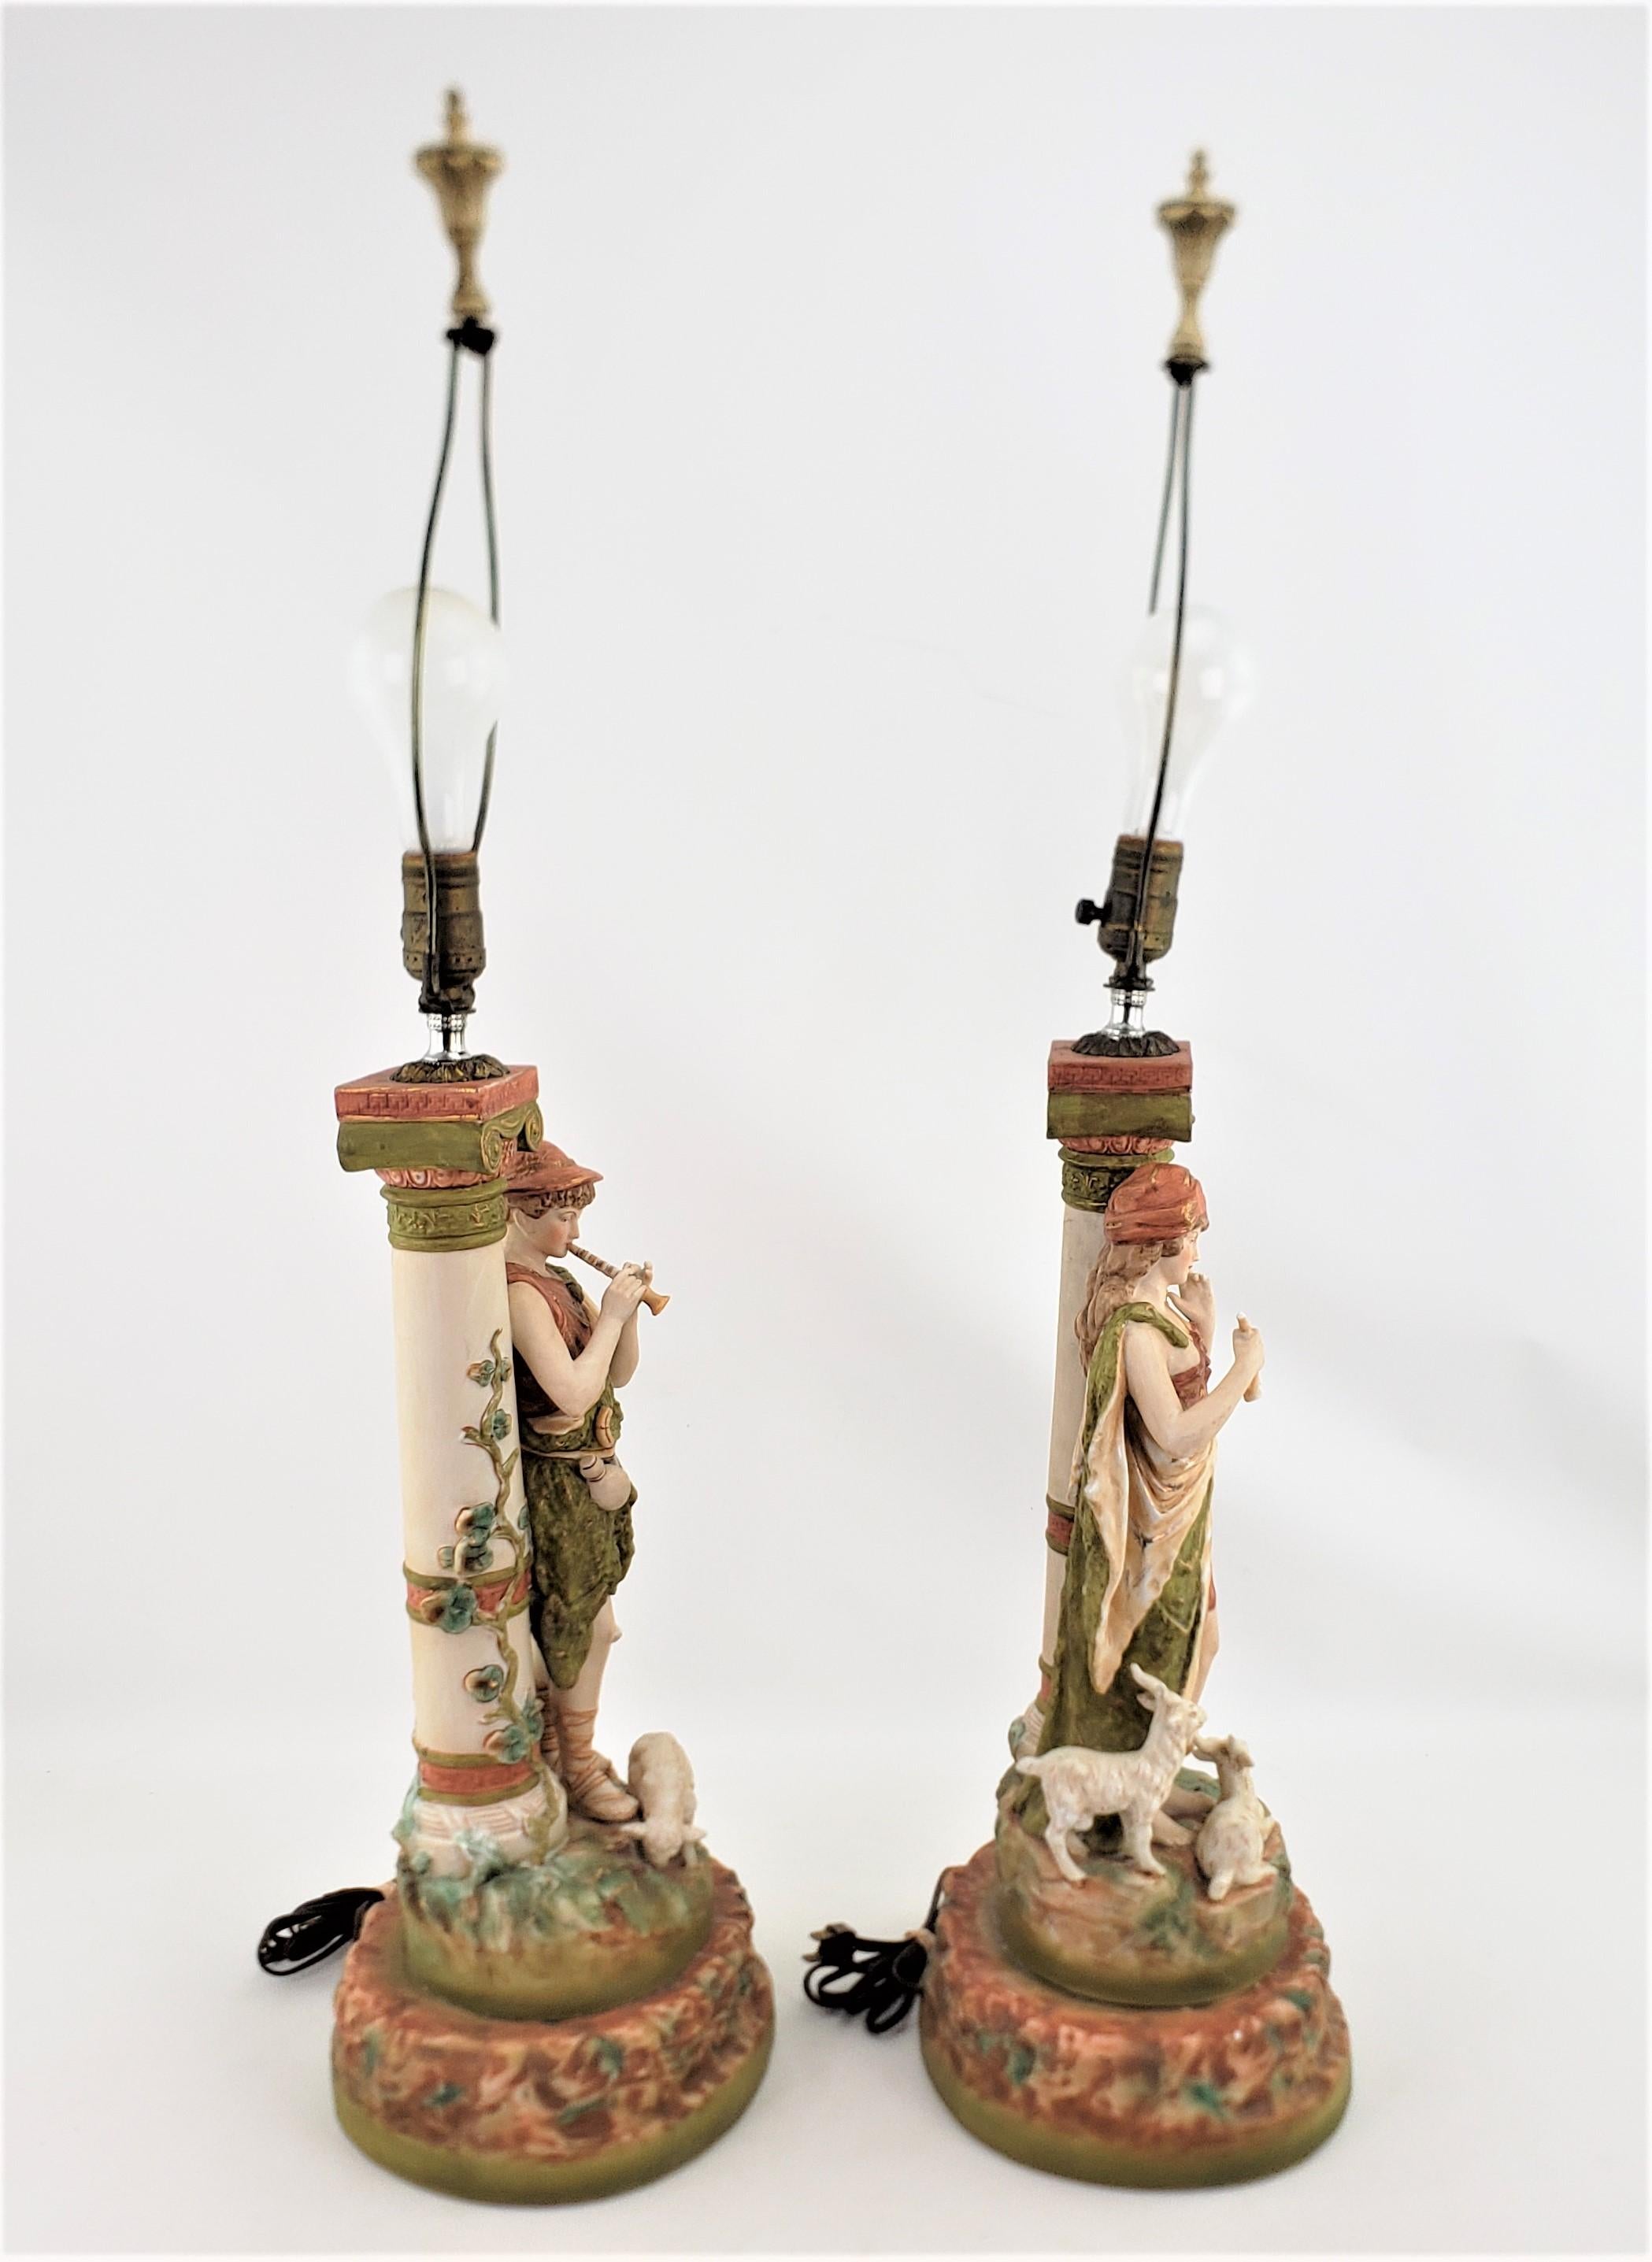 Neoclassical Revival Pair of Large Antique Royal Dux Attributed Table Lamps with Neoclassical Figures For Sale